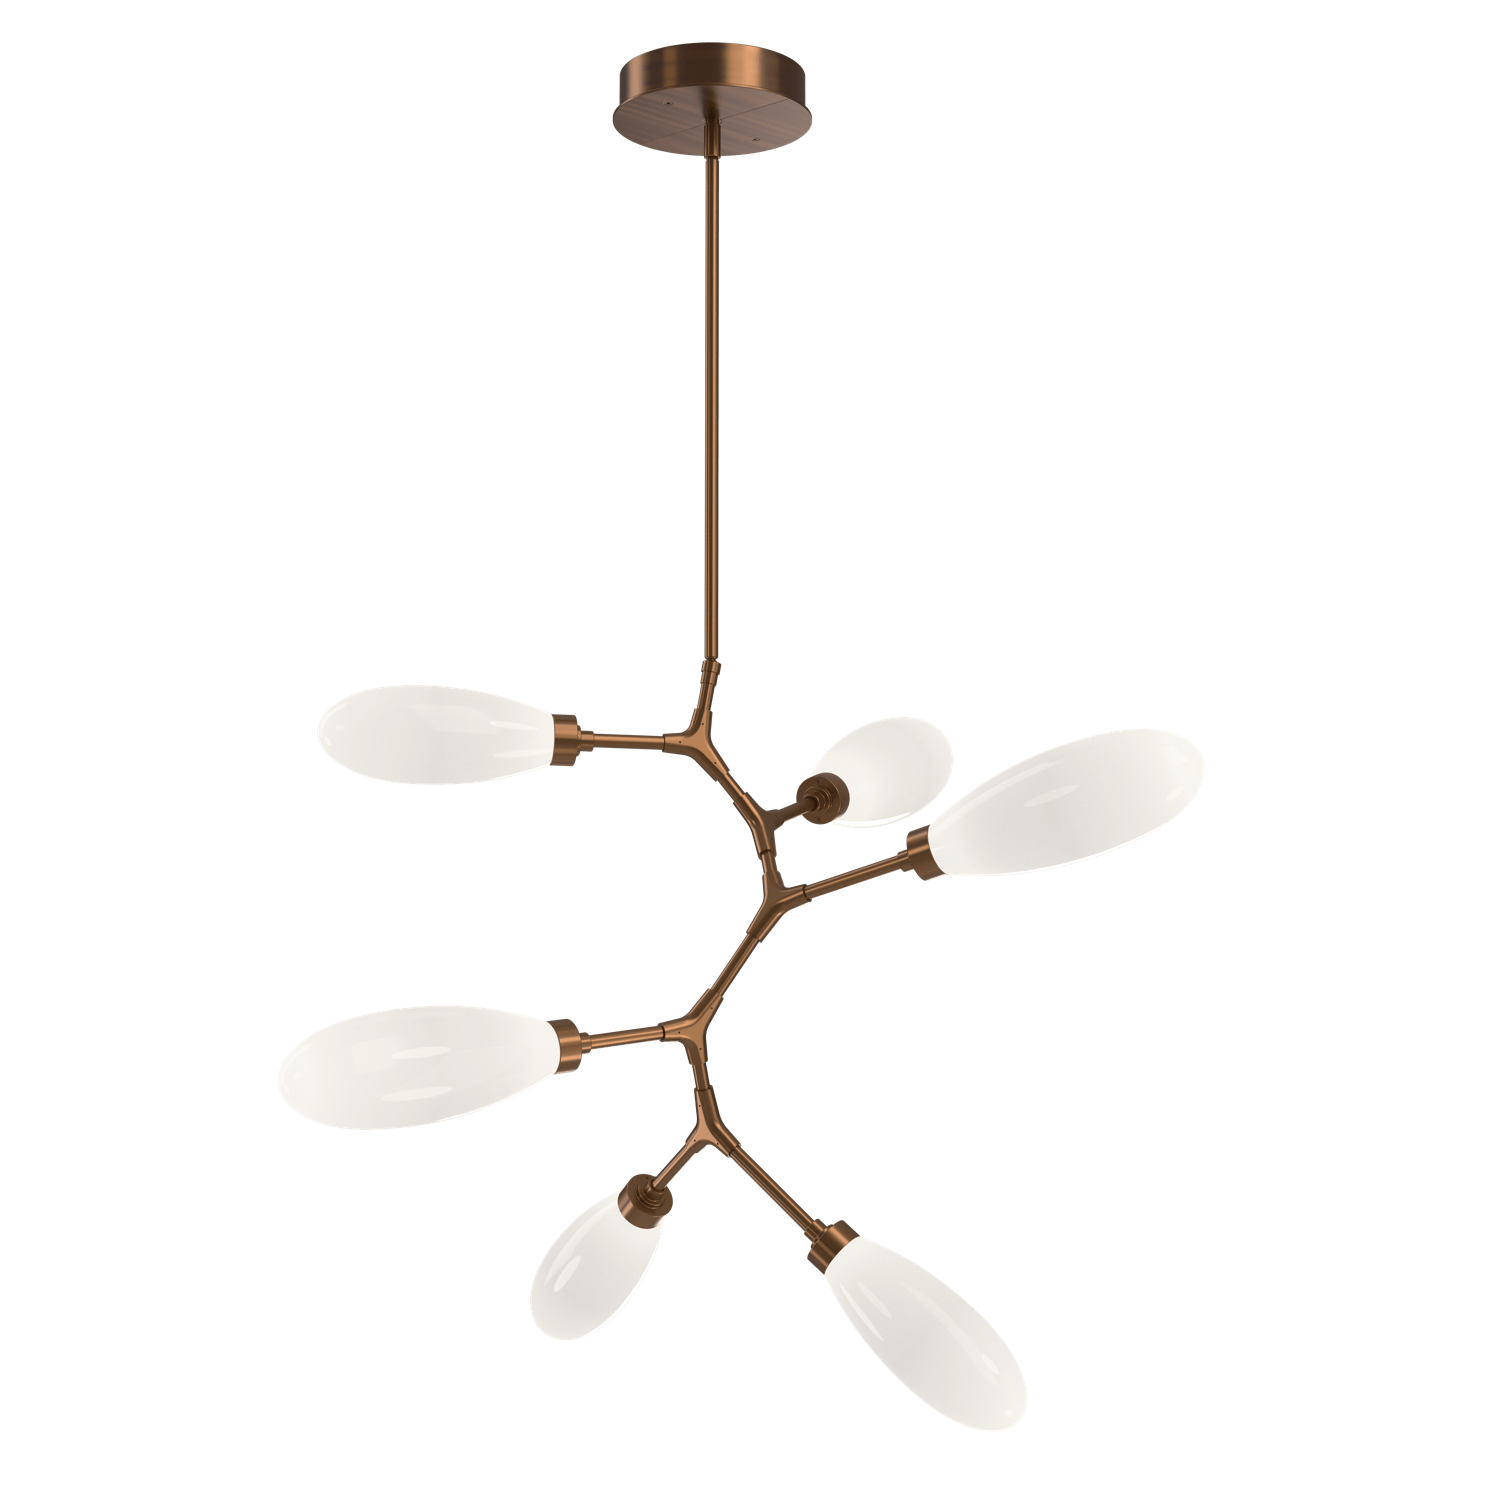 CHB0071-VA-RB-WL-LL-Hammerton-Studio-Fiori-6-light-organic-vine-chandelier-with-oil-rubbed-bronze-finish-and-opal-white-glass-shades-and-LED-lamping